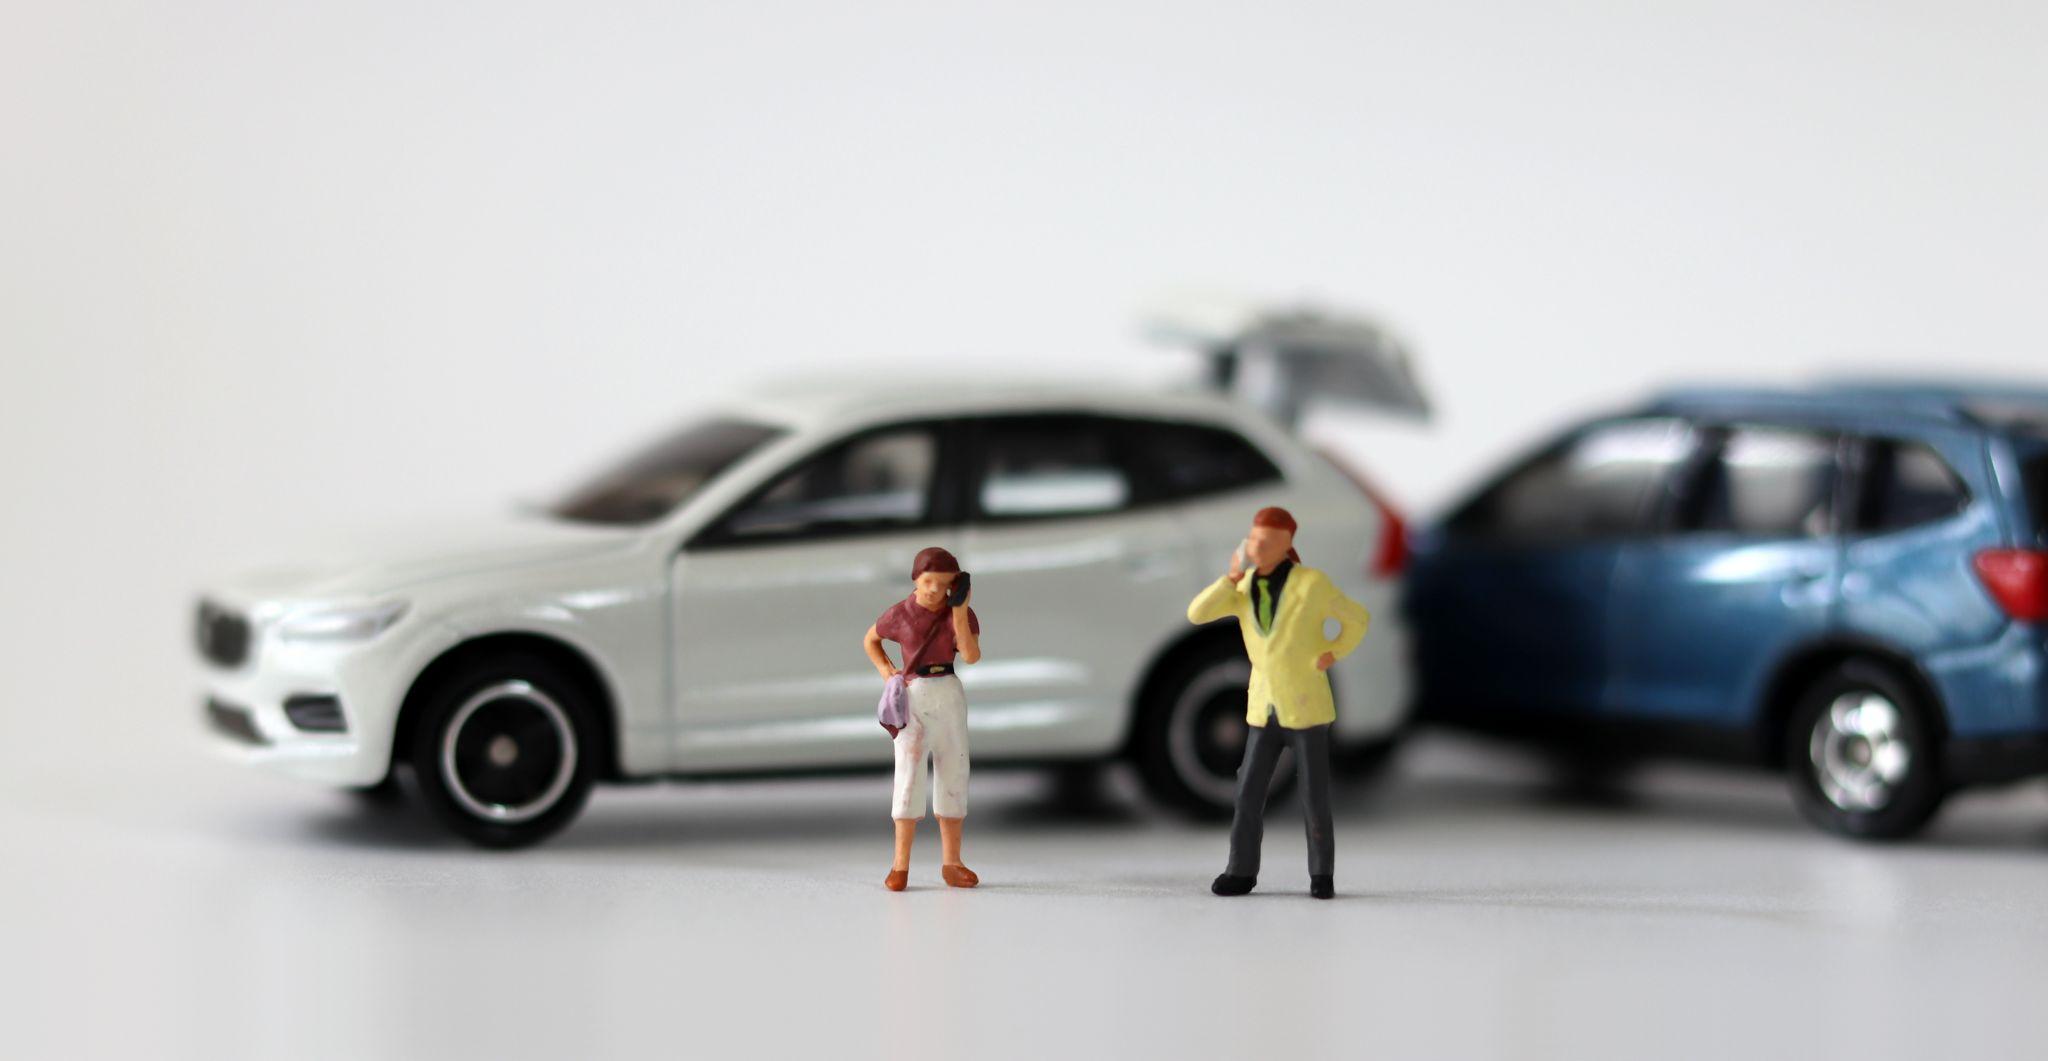 Two miniature cars collided and two miniature people calling. Concepts about car accidents.